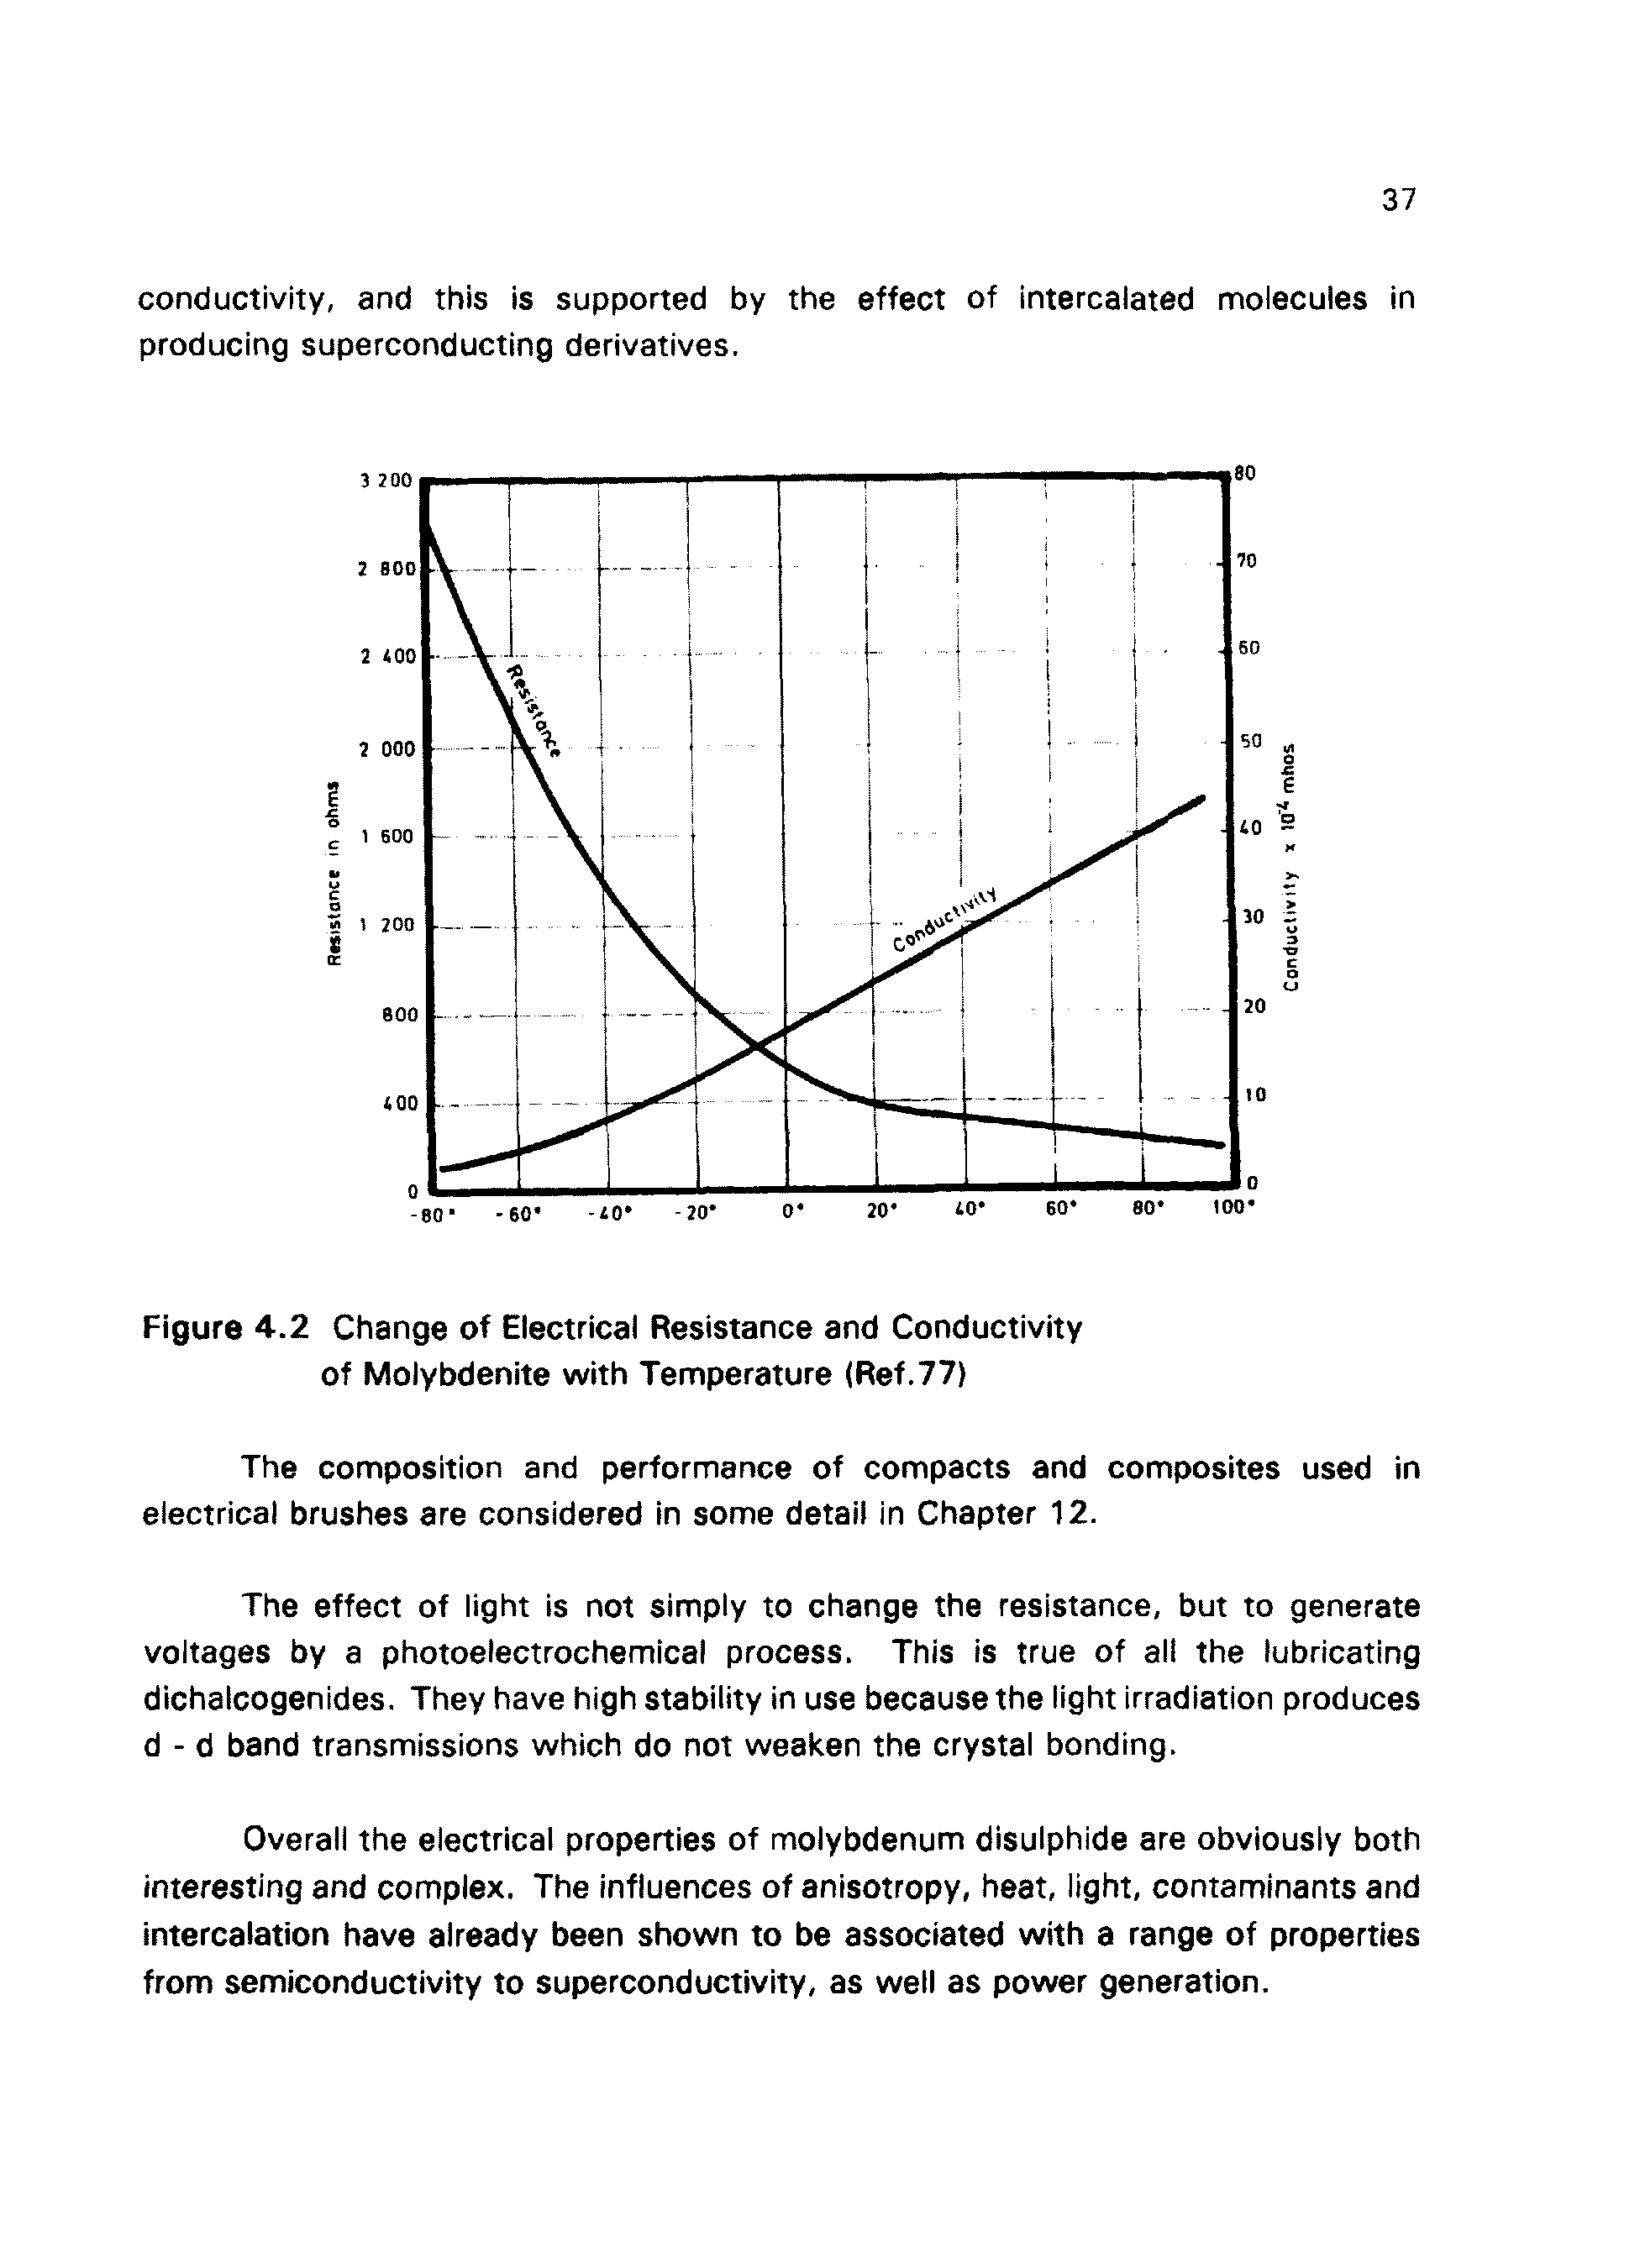 Figure 4.2 Change of Electrical Resistance and Conductivity of Molybdenite with Temperature (Ref.77)...